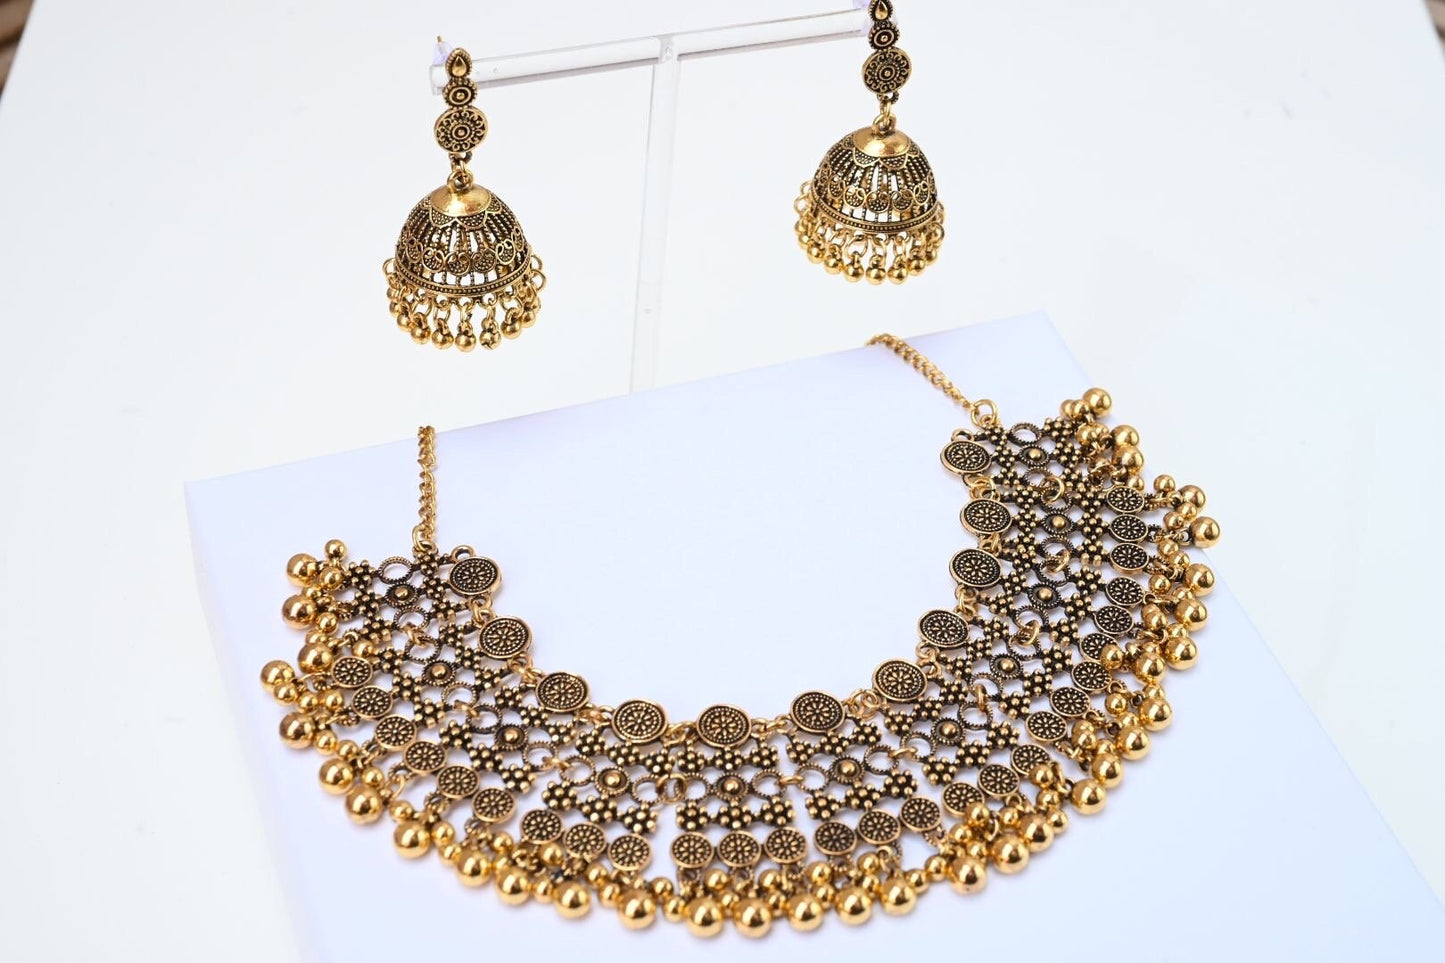 Antique Gold Afghan Coin Jewellery Set/ Statement Necklace and Earrings Set, Indian Pakistani Necklace Set, Rajasthani Necklace Choker Set